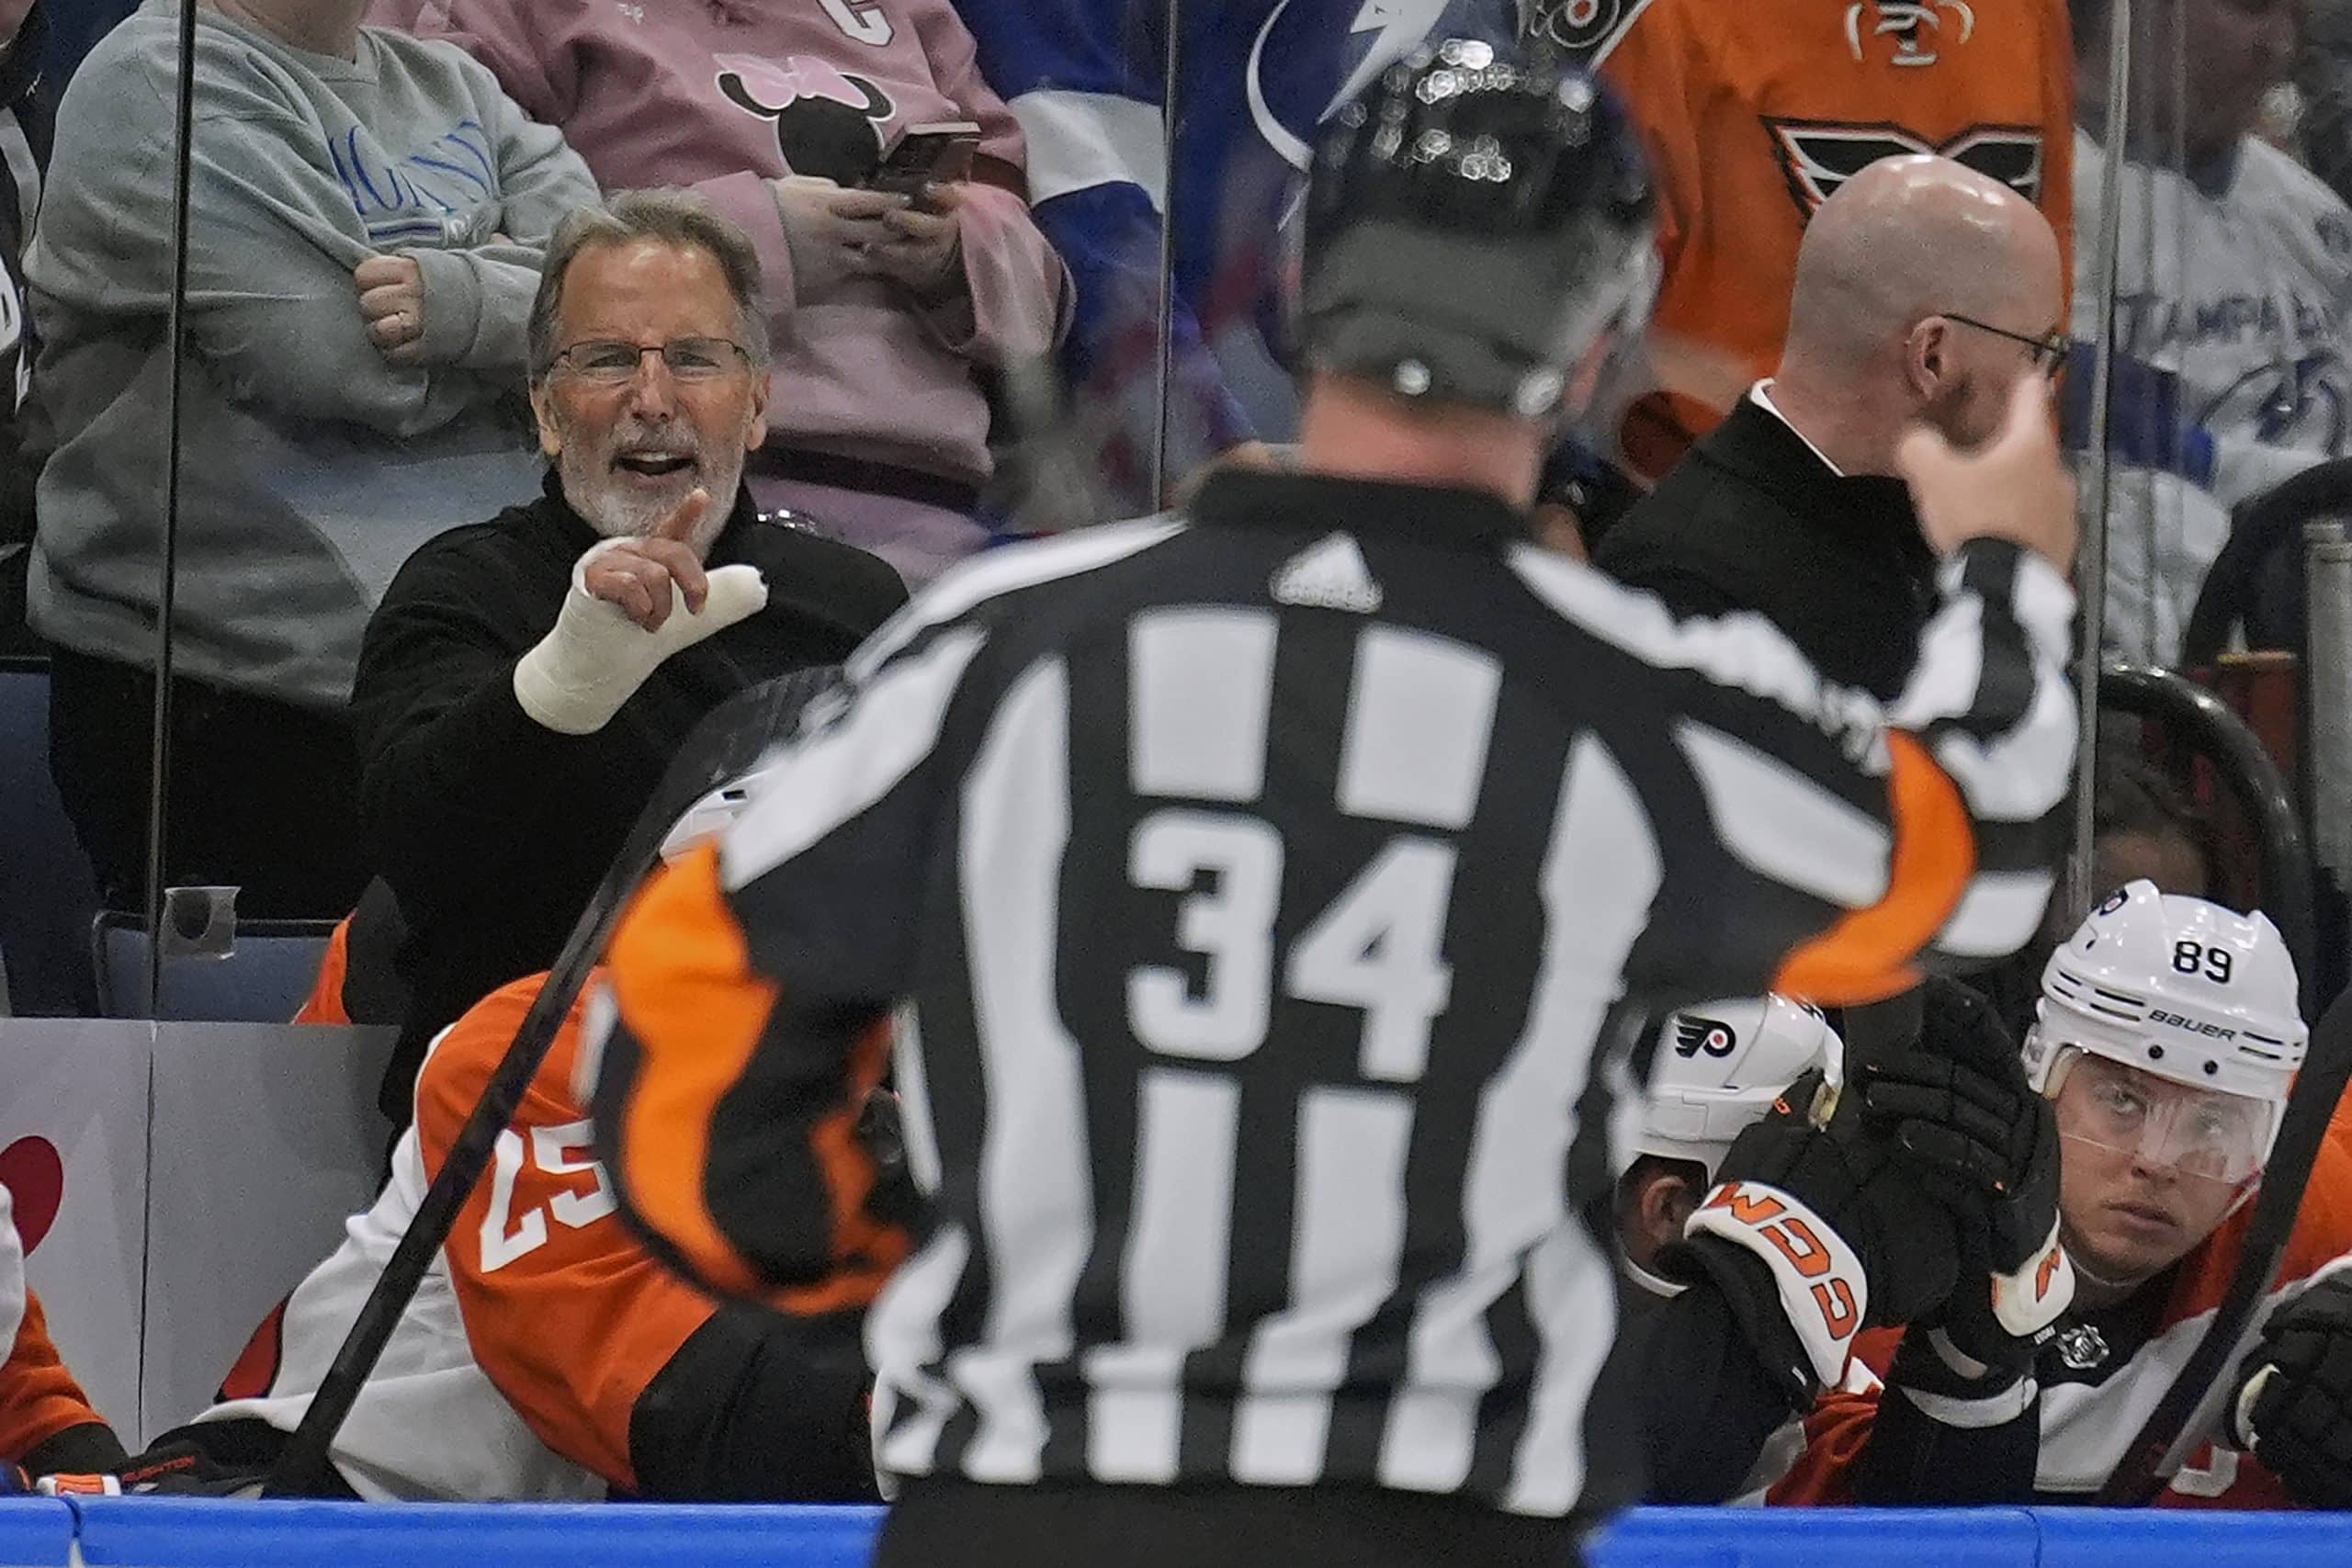 Flyers coach John Tortorella reluctantly leaves bench after being